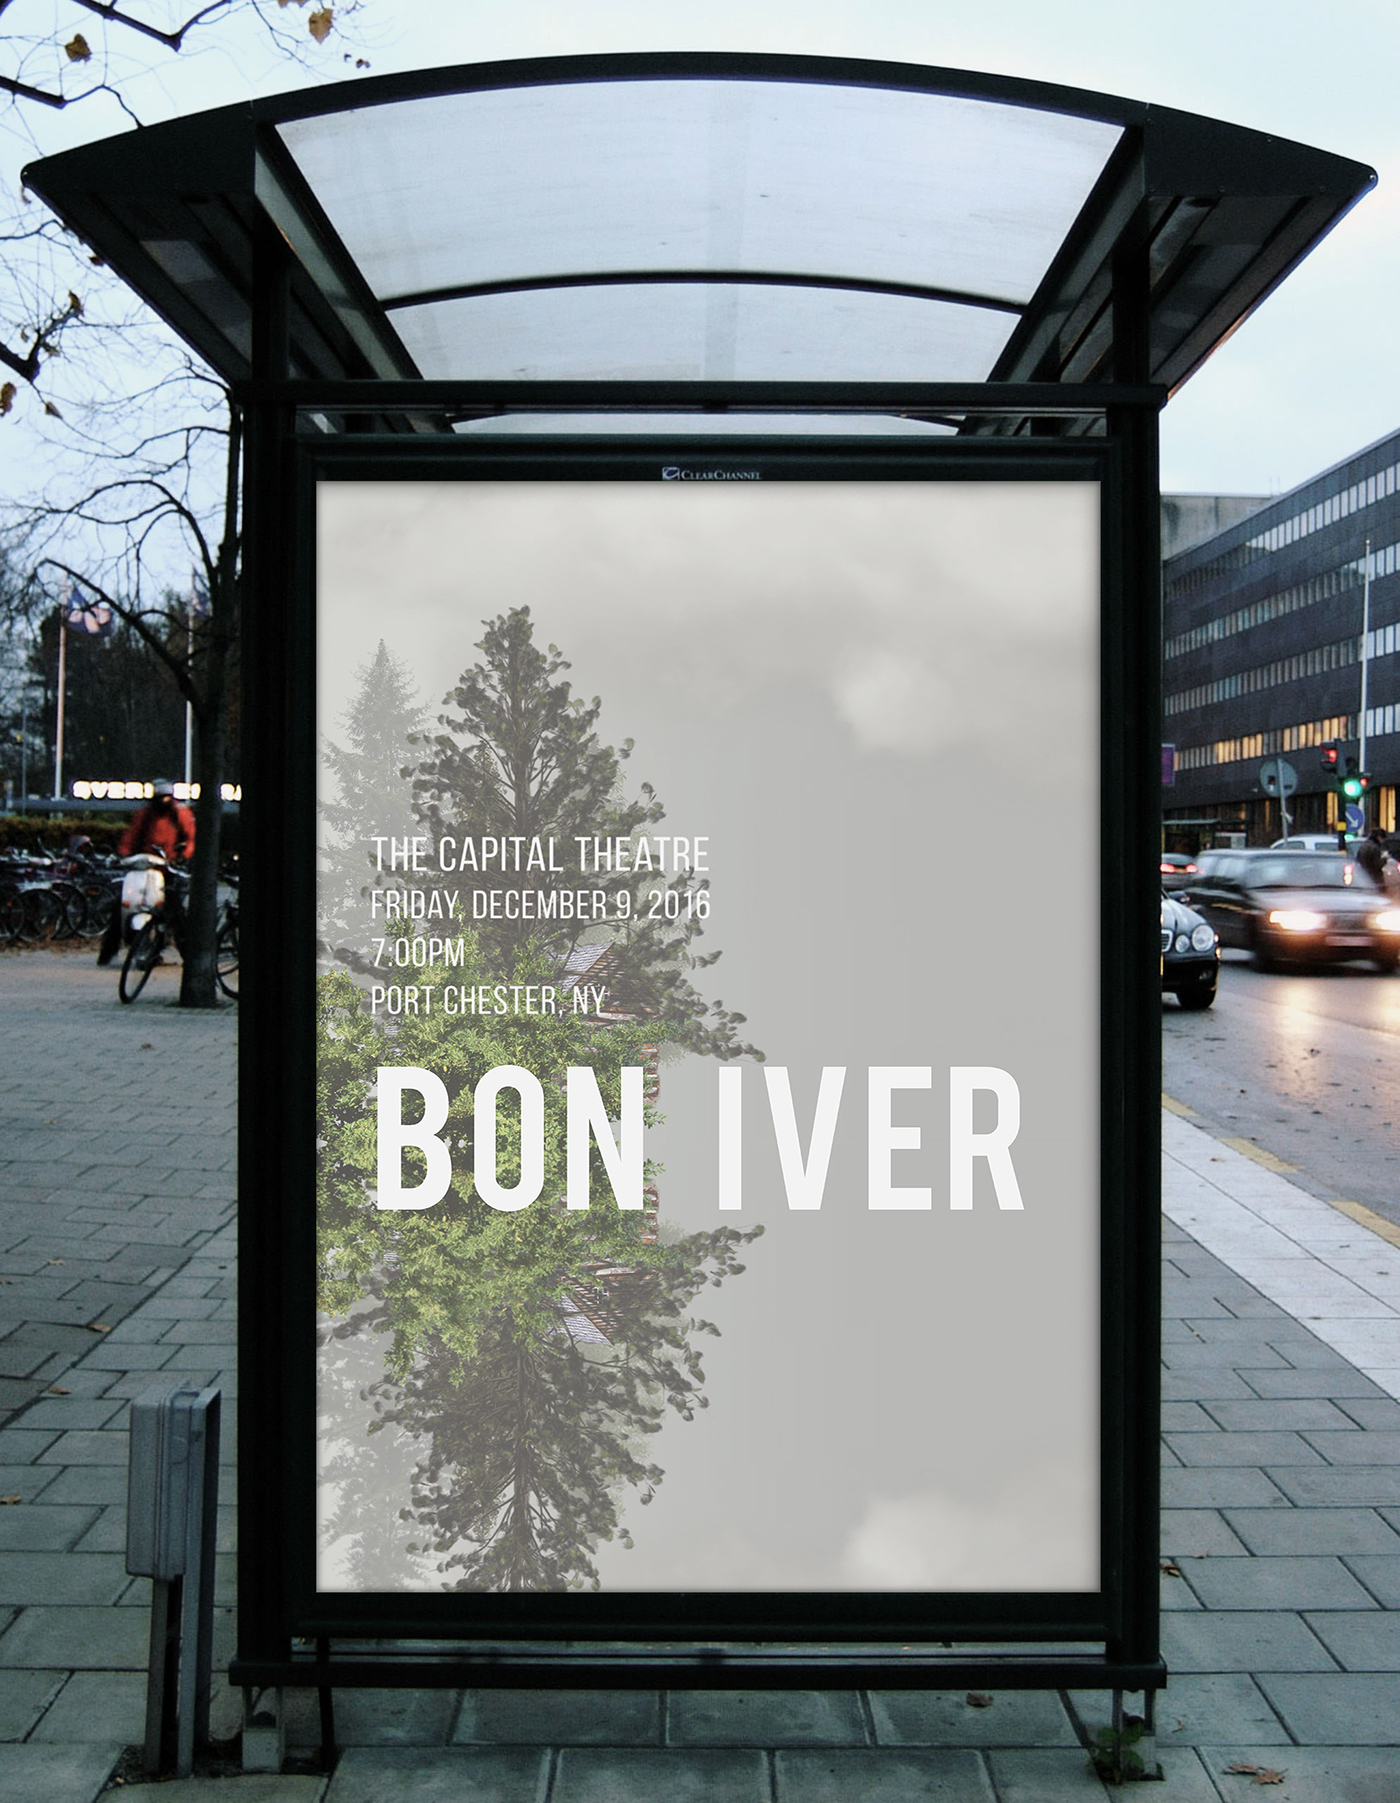 bon iver record record sleeve concert poster